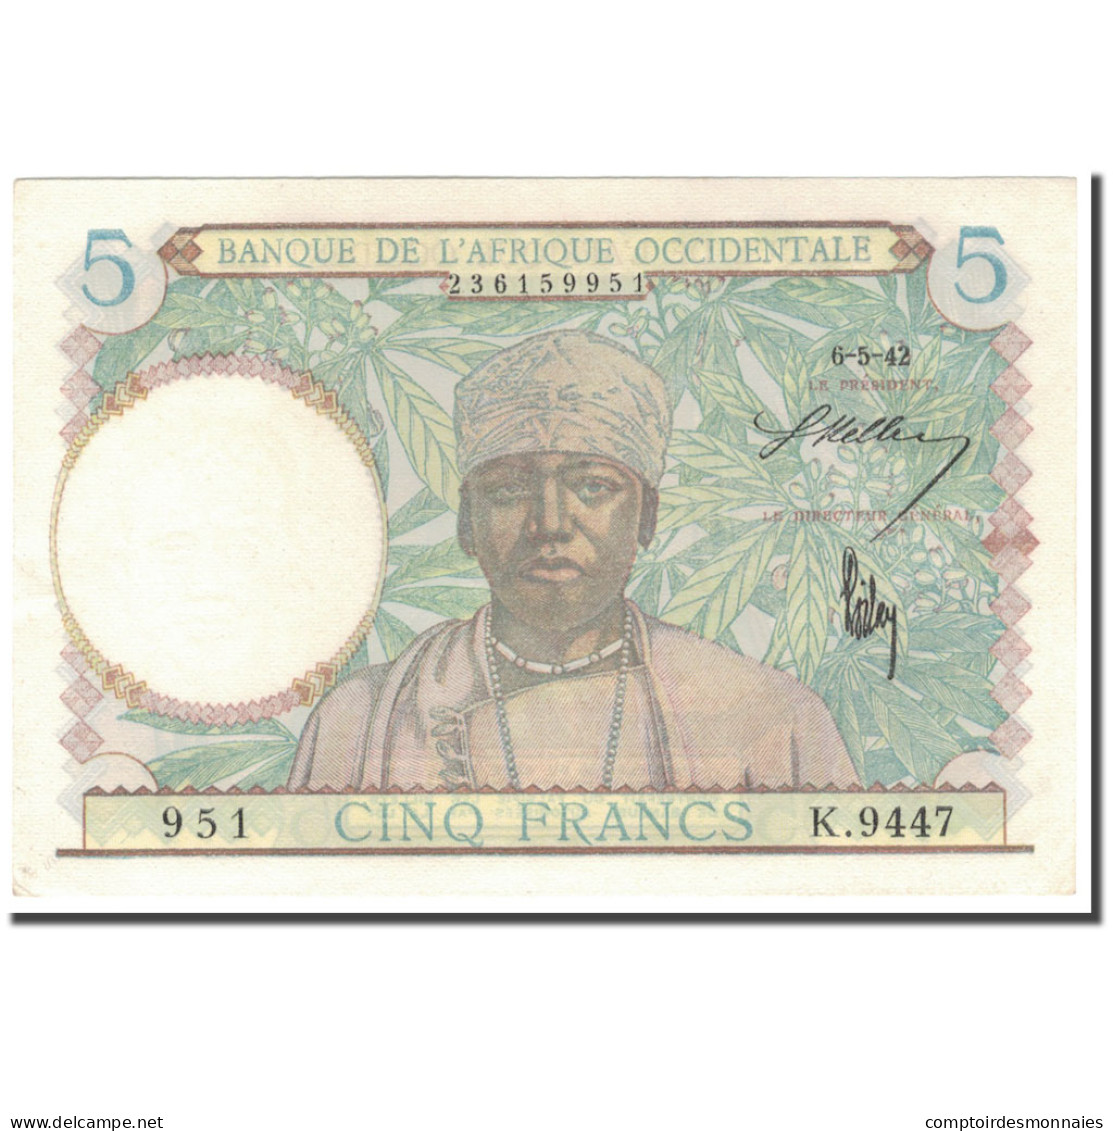 Billet, French West Africa, 5 Francs, 1942-05-06, KM:21, NEUF - Centraal-Afrikaanse Staten